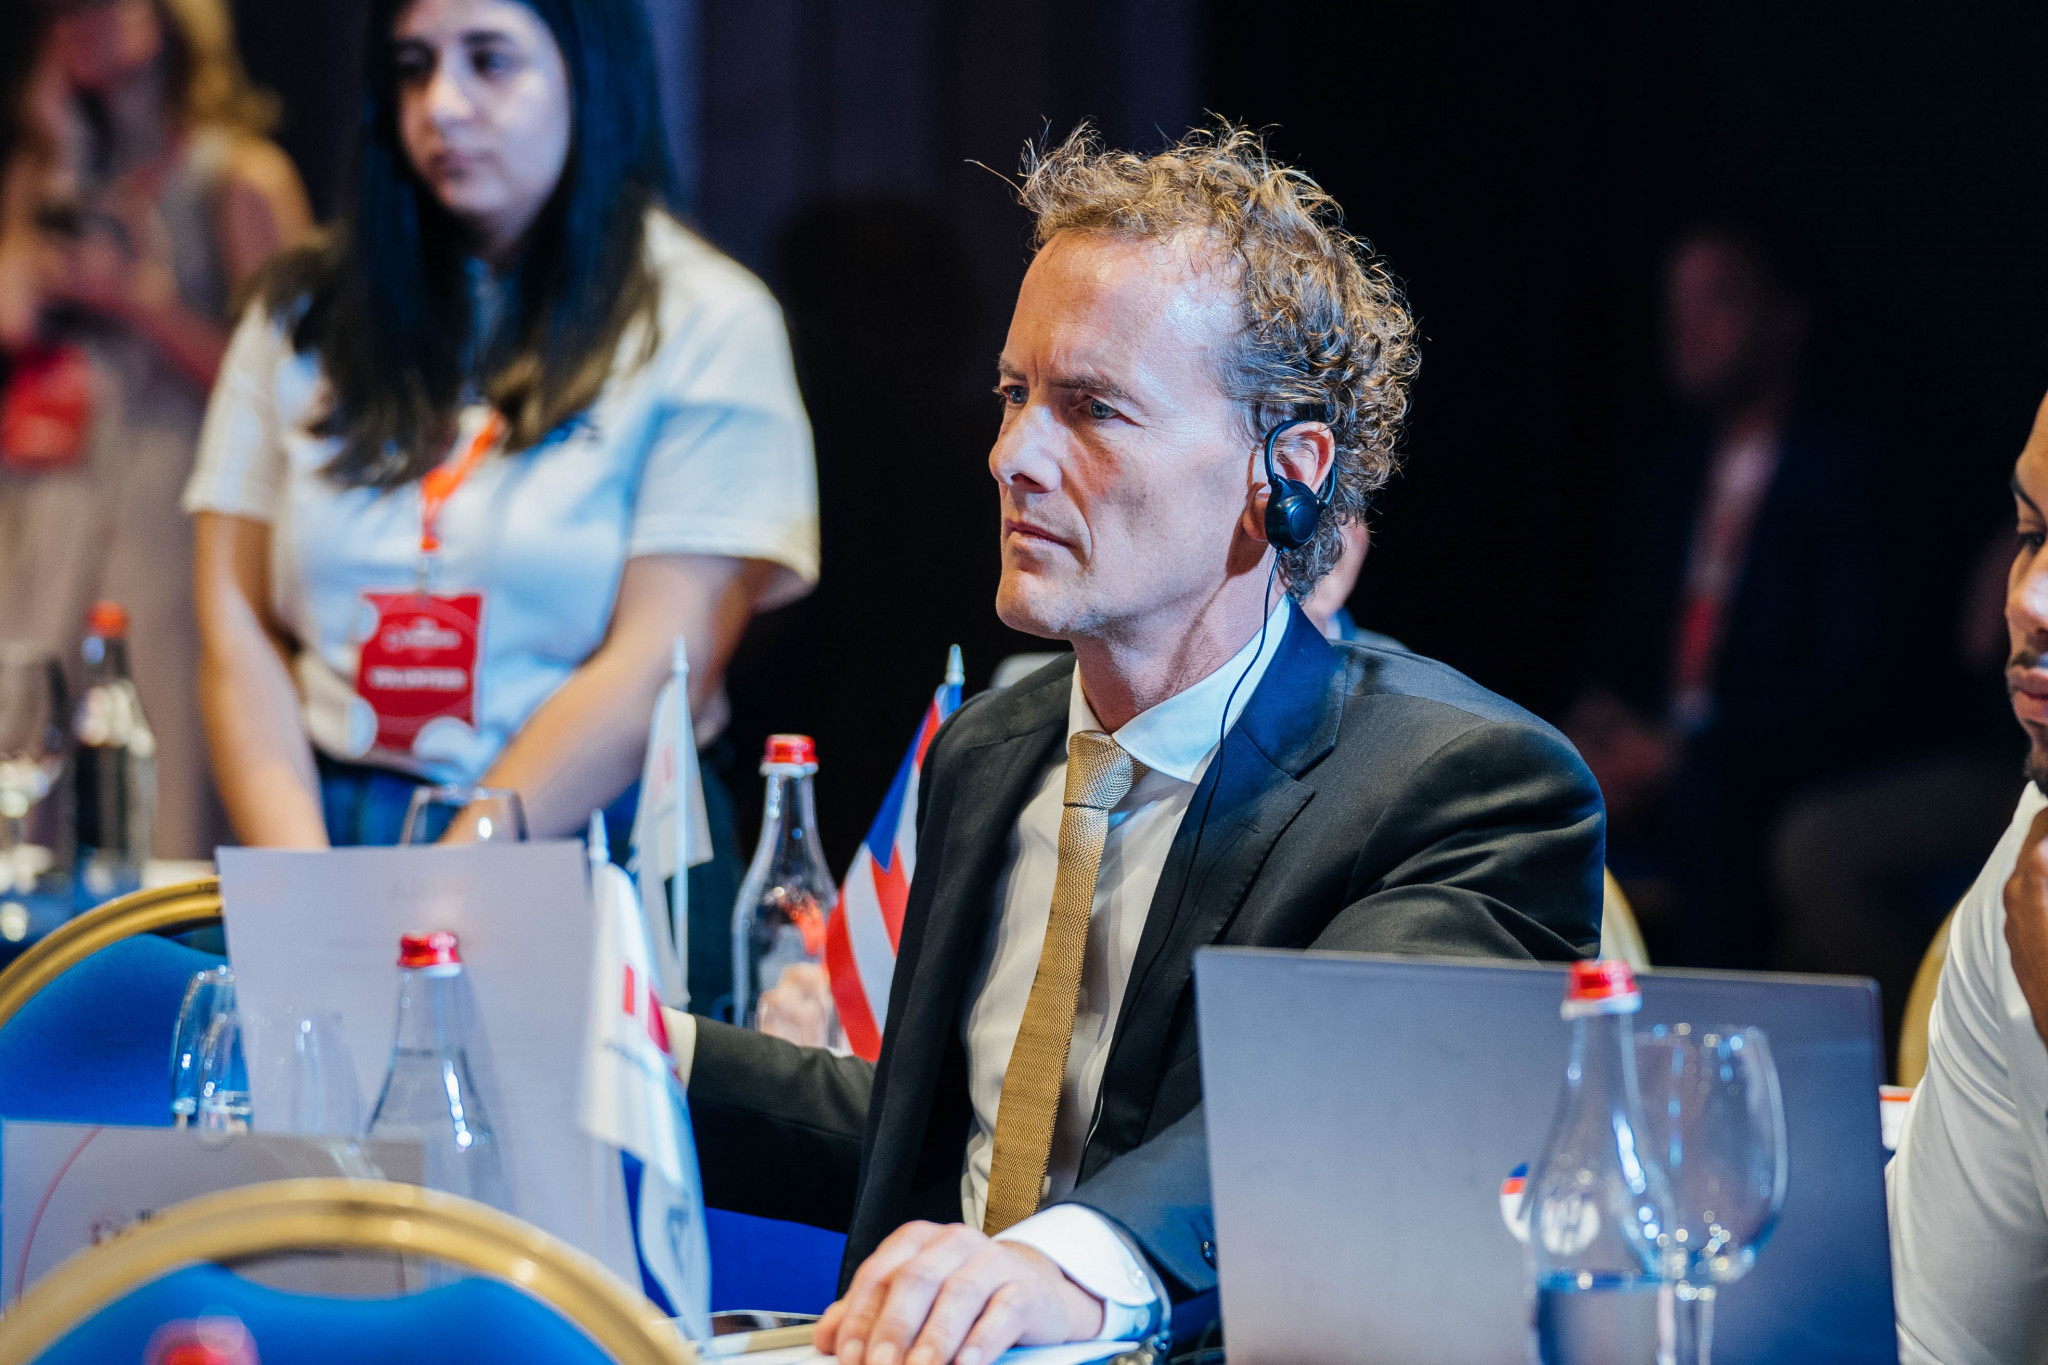 Boris van der Vorst was not given the opportunity to stand for IBA President at an Extraordinary Congress in Yerevan after members voted not to re-stage the election ©IBA